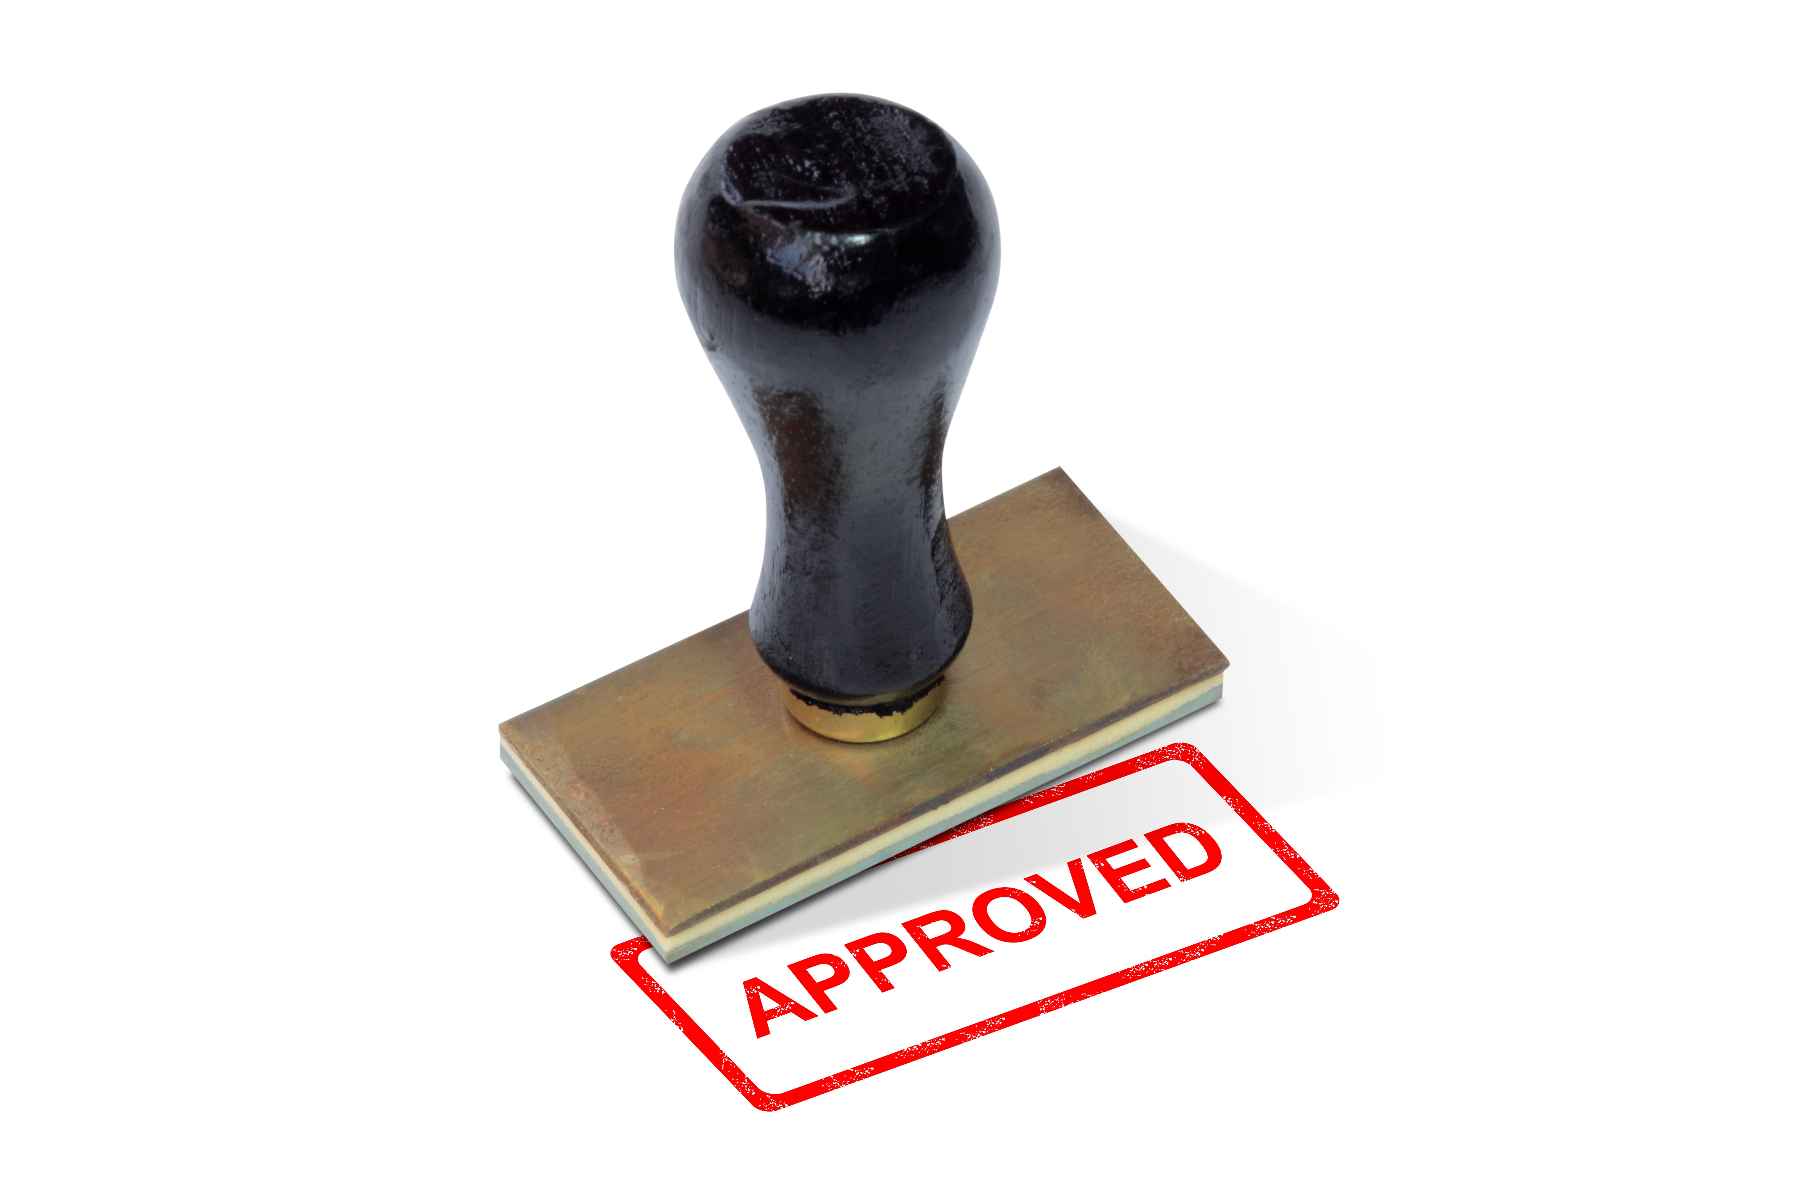 Rubber stamp stamping "approved" in red ink on white background. Liquor license approval.